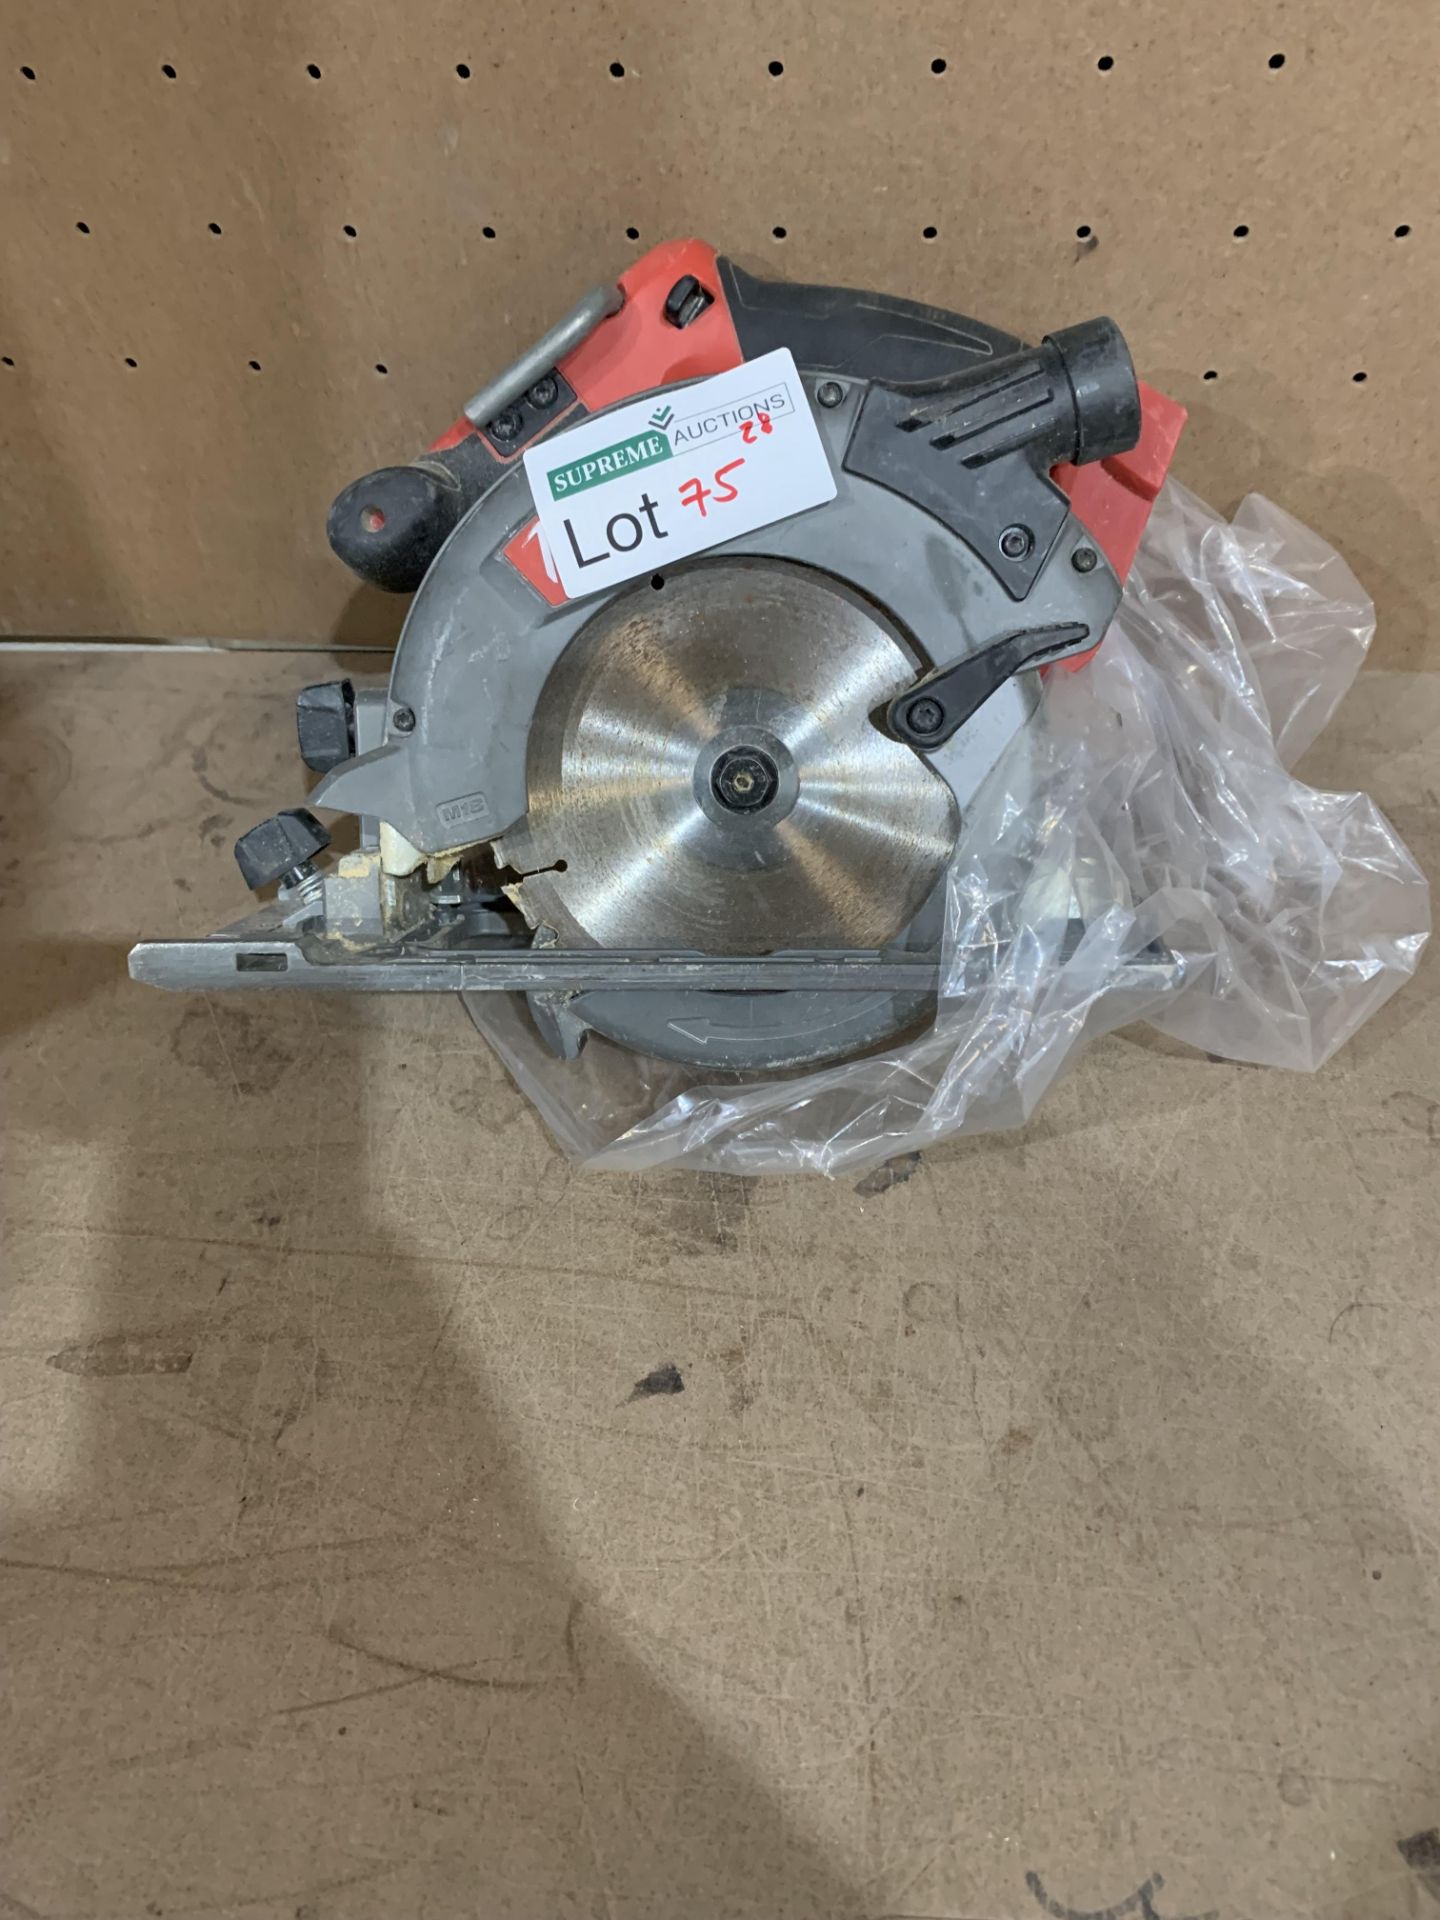 MILWAUKEE M18 CCS55 CORDLESS CIRCULAR SAW (UNCHECKED, UNTESTED)